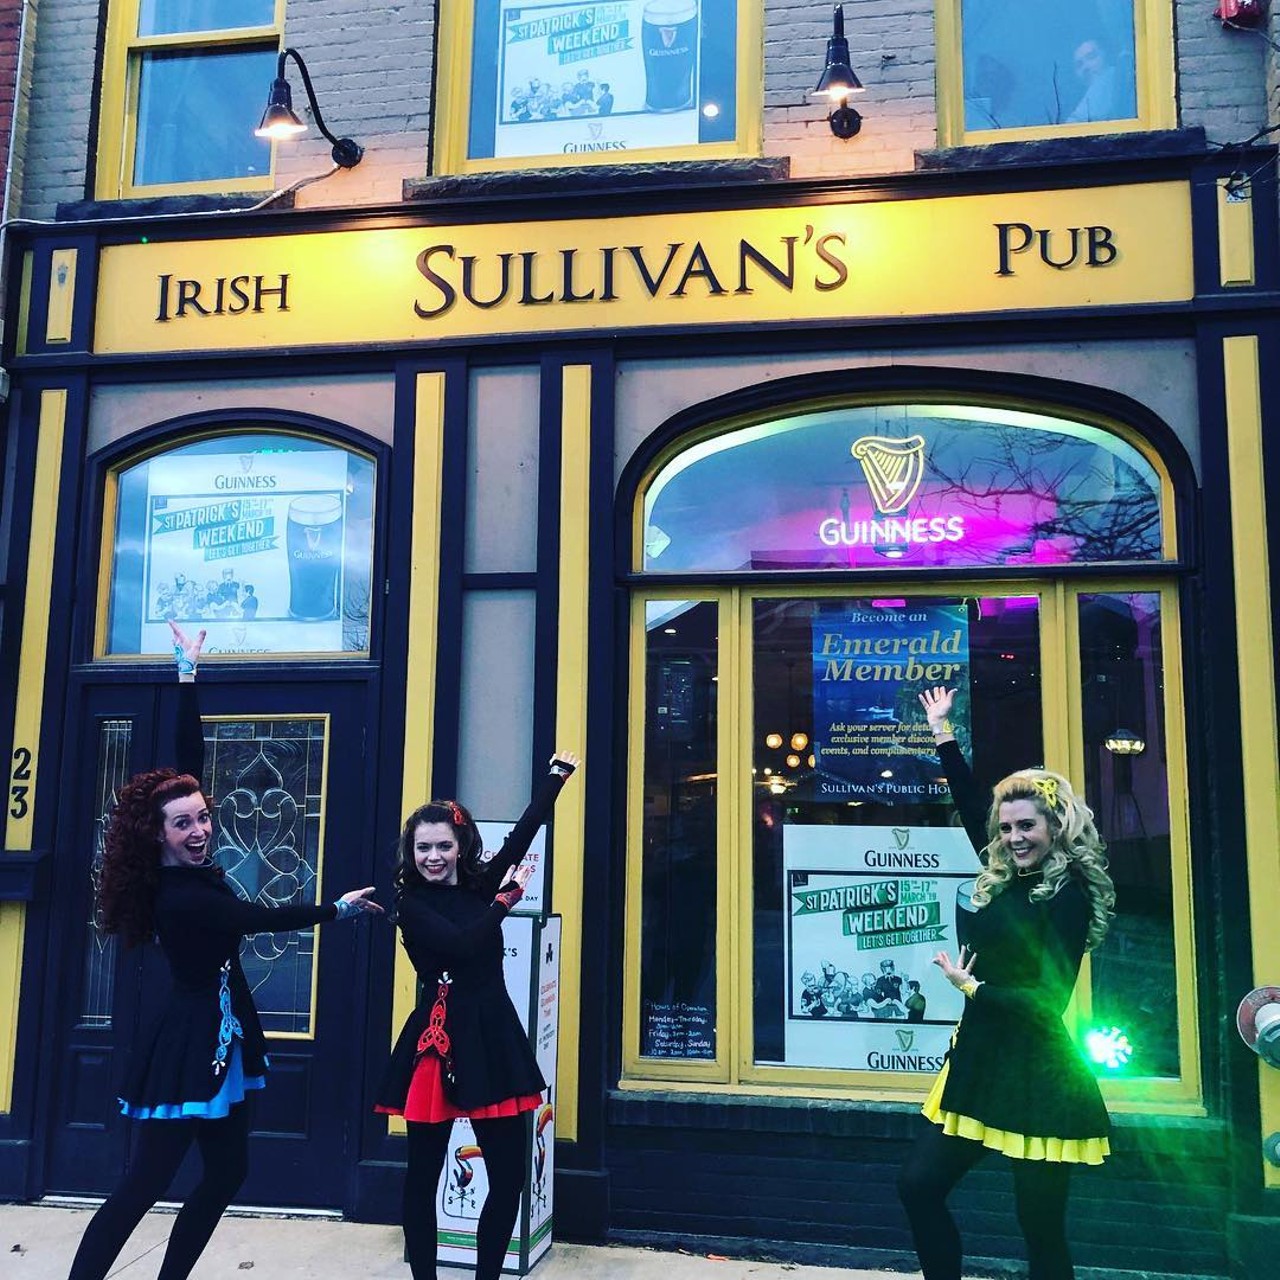 Sullivan’s Public House
23 N. Washington St., Oxford; 248-572-7344; sullivanspublichouse.com
One of the owners actually lived in Ireland, bringing authenticity to this bar, which opened in 2014. Its menu includes a “full Irish breakfast” served for brunch, along with other Irish favorites.